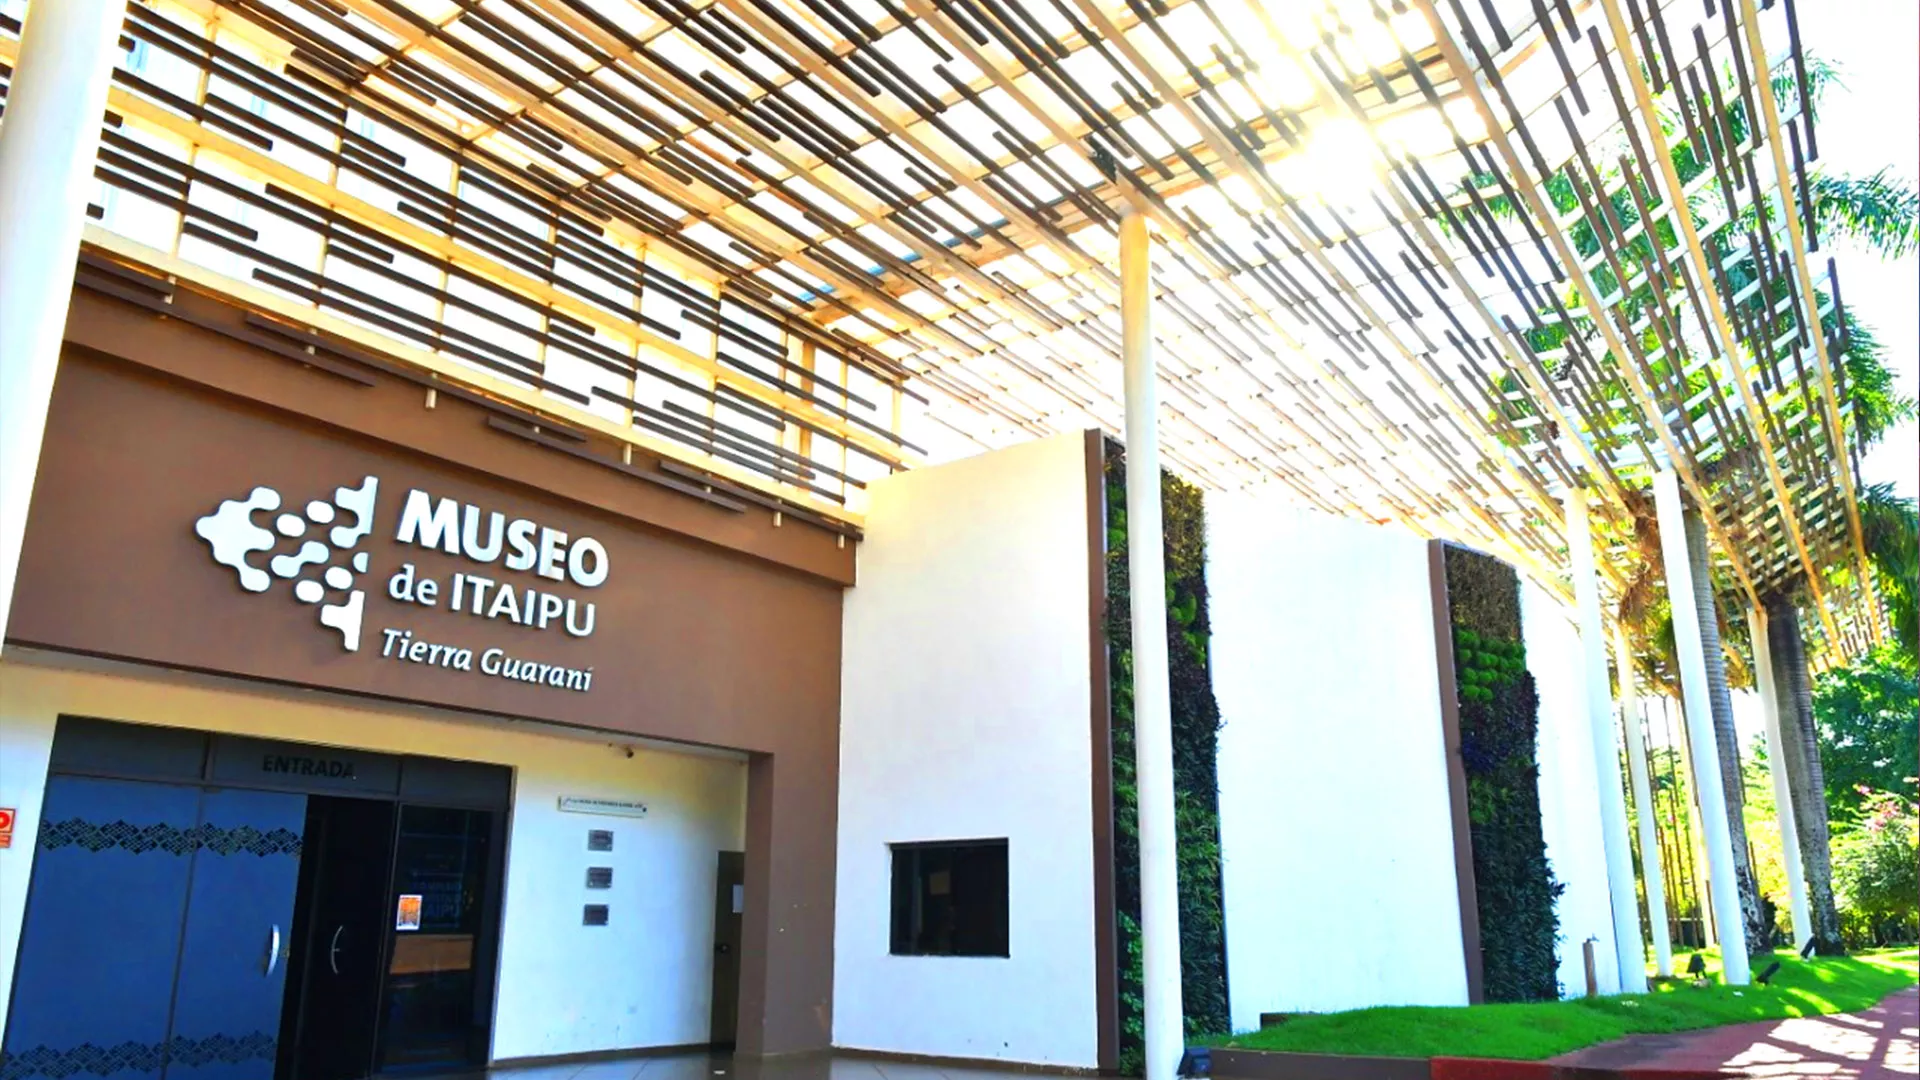 Itaipu Guarani Land Museum in Paraguay, South America | Museums - Rated 3.8